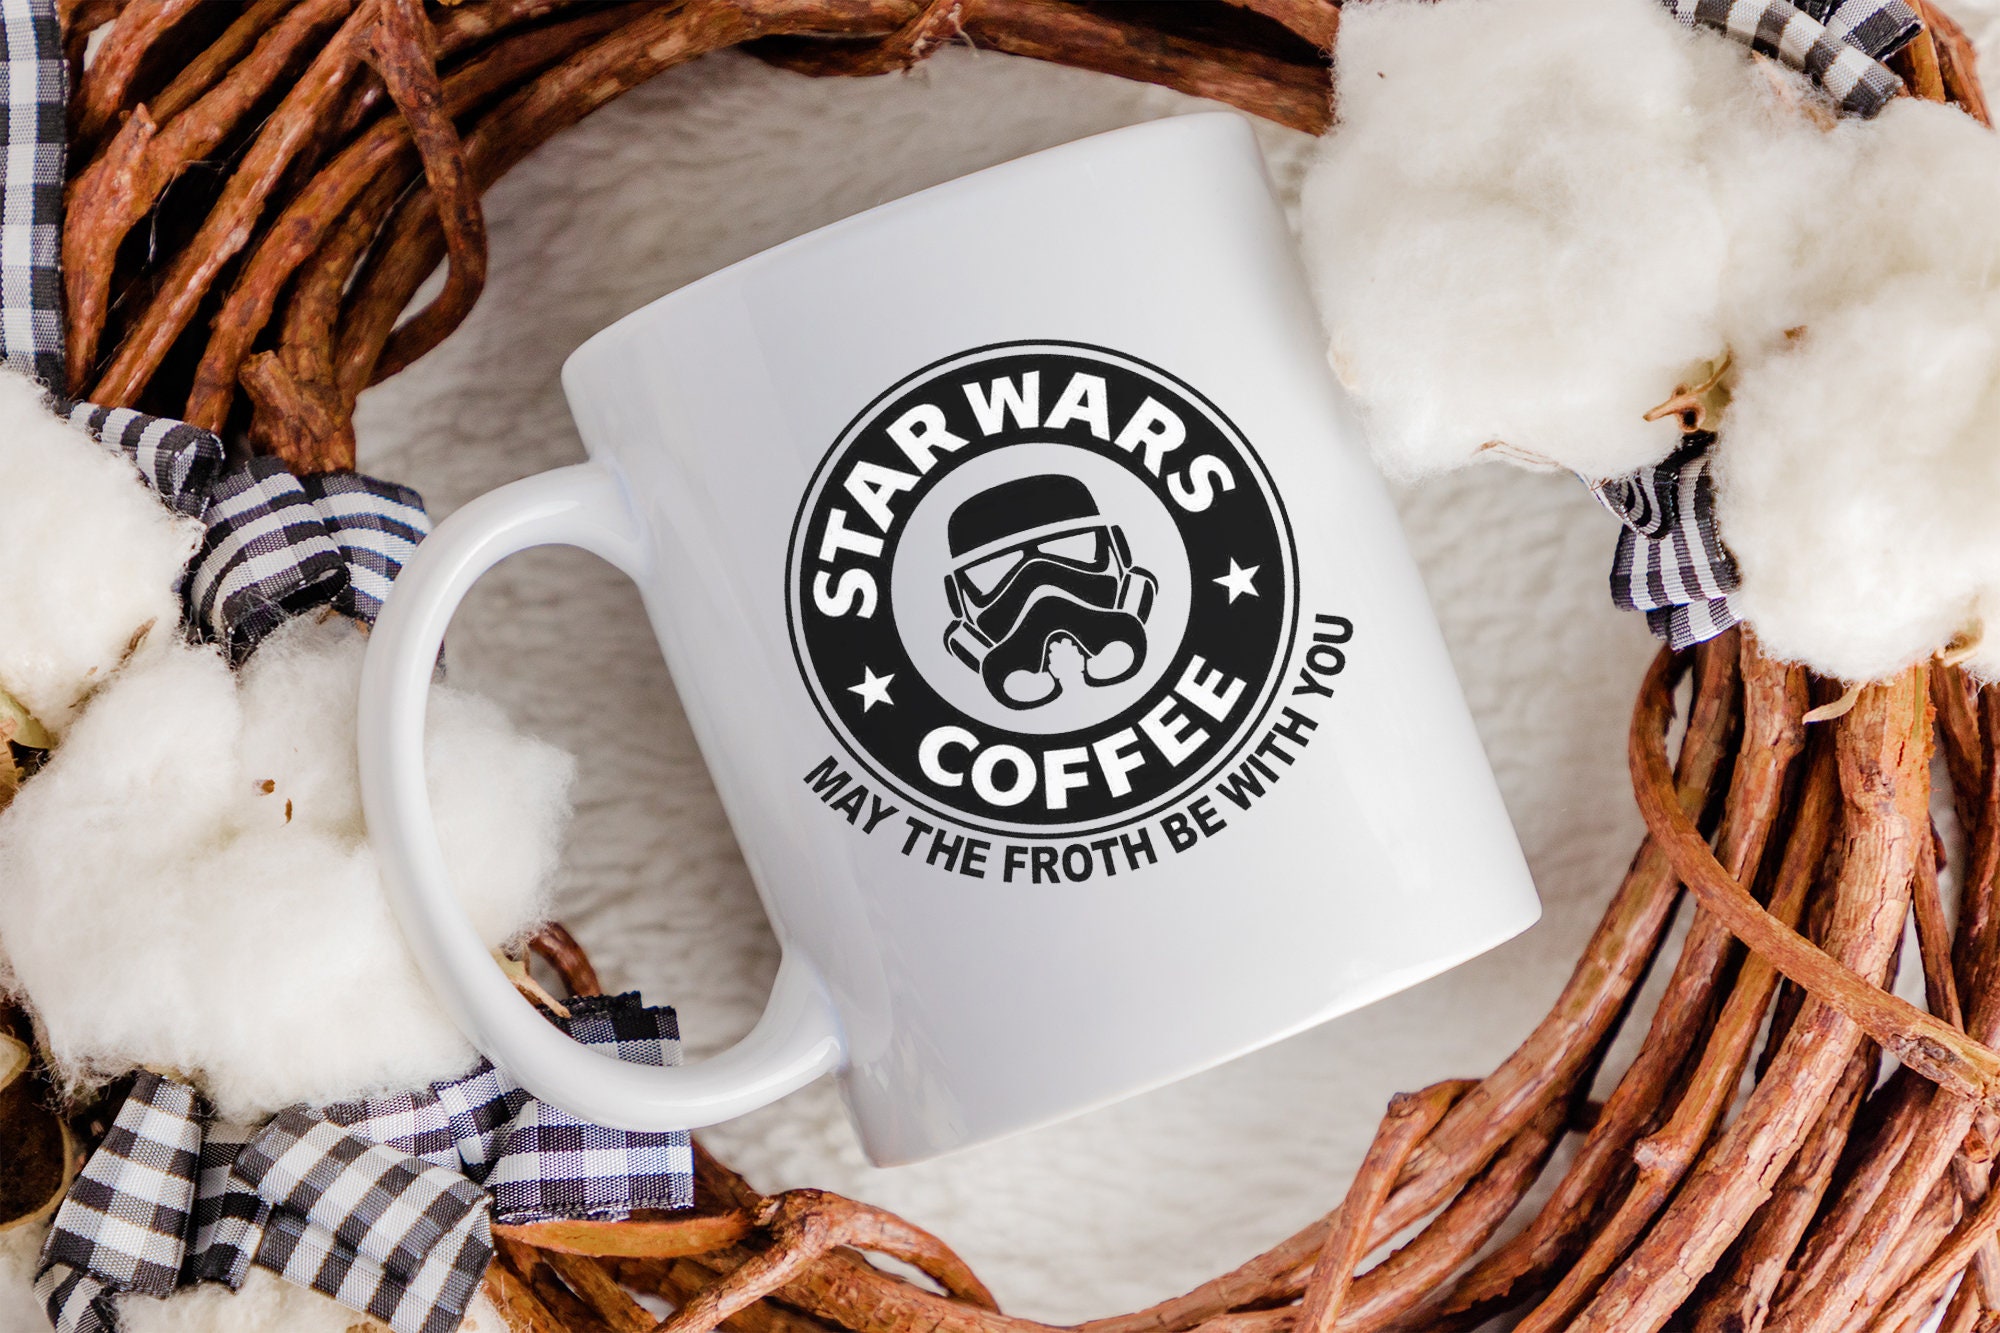 May the Fourth Be With You, Star Wars Mug, May the 4th Be With, Coffee Mug,  11oz